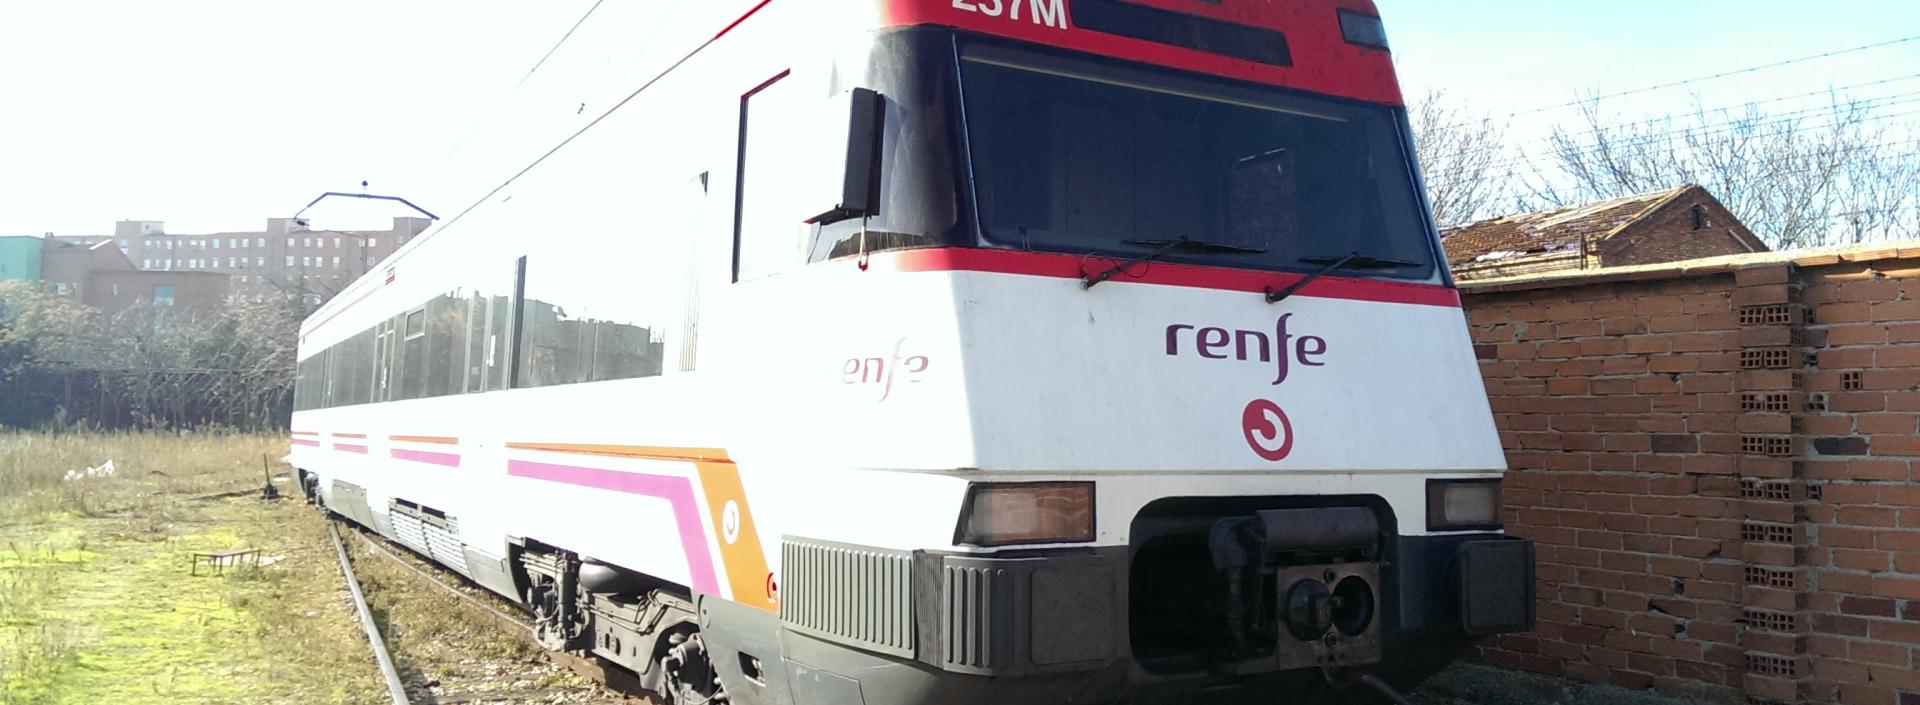 Manufacture supervision and service commencement of conventional trains in Spain